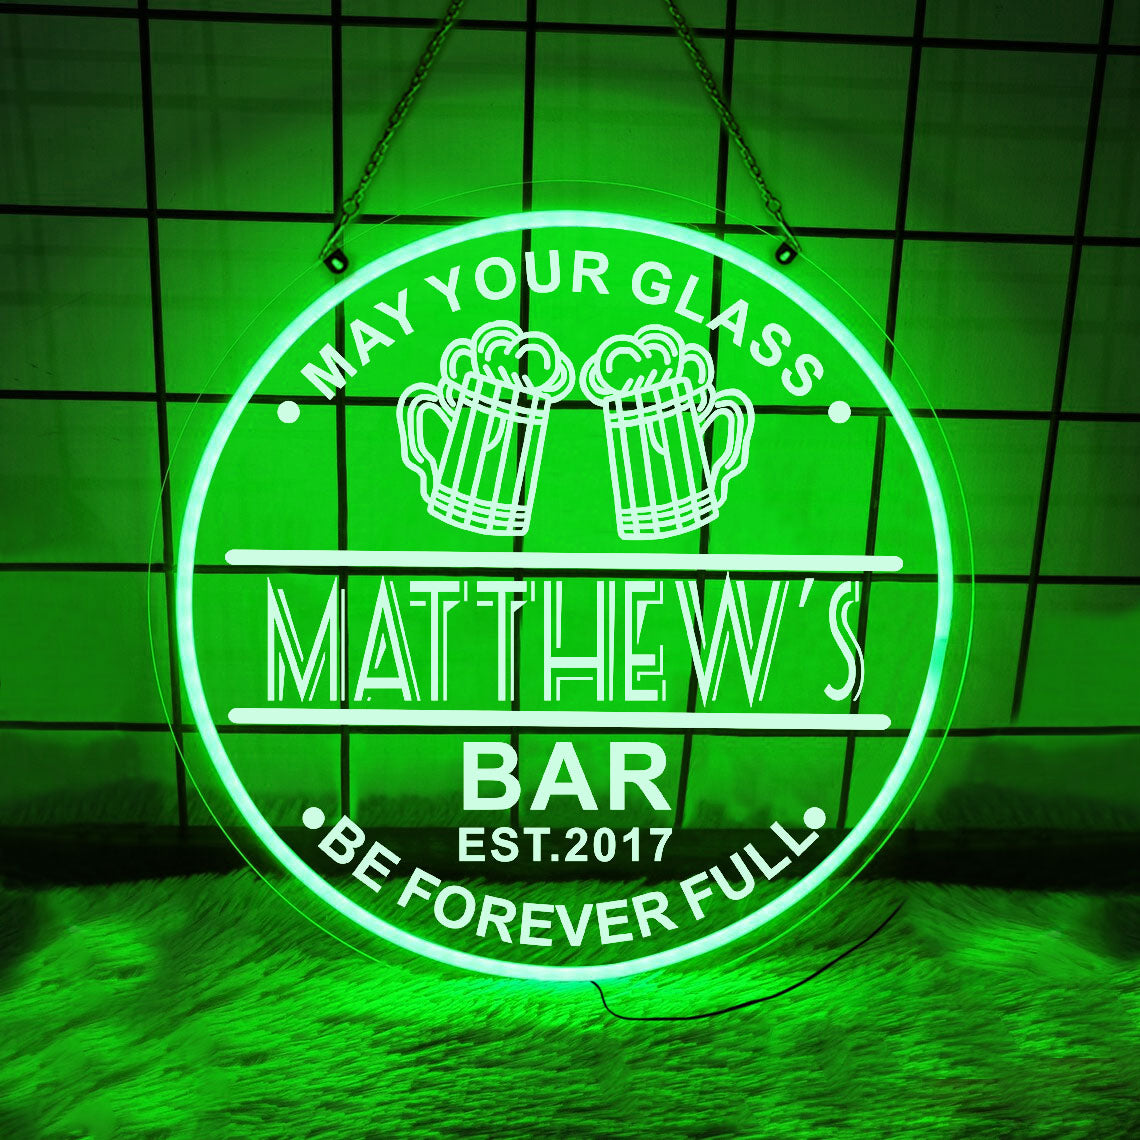 Personalized LED Color Changing Acrylic Double Beer Mug Sign